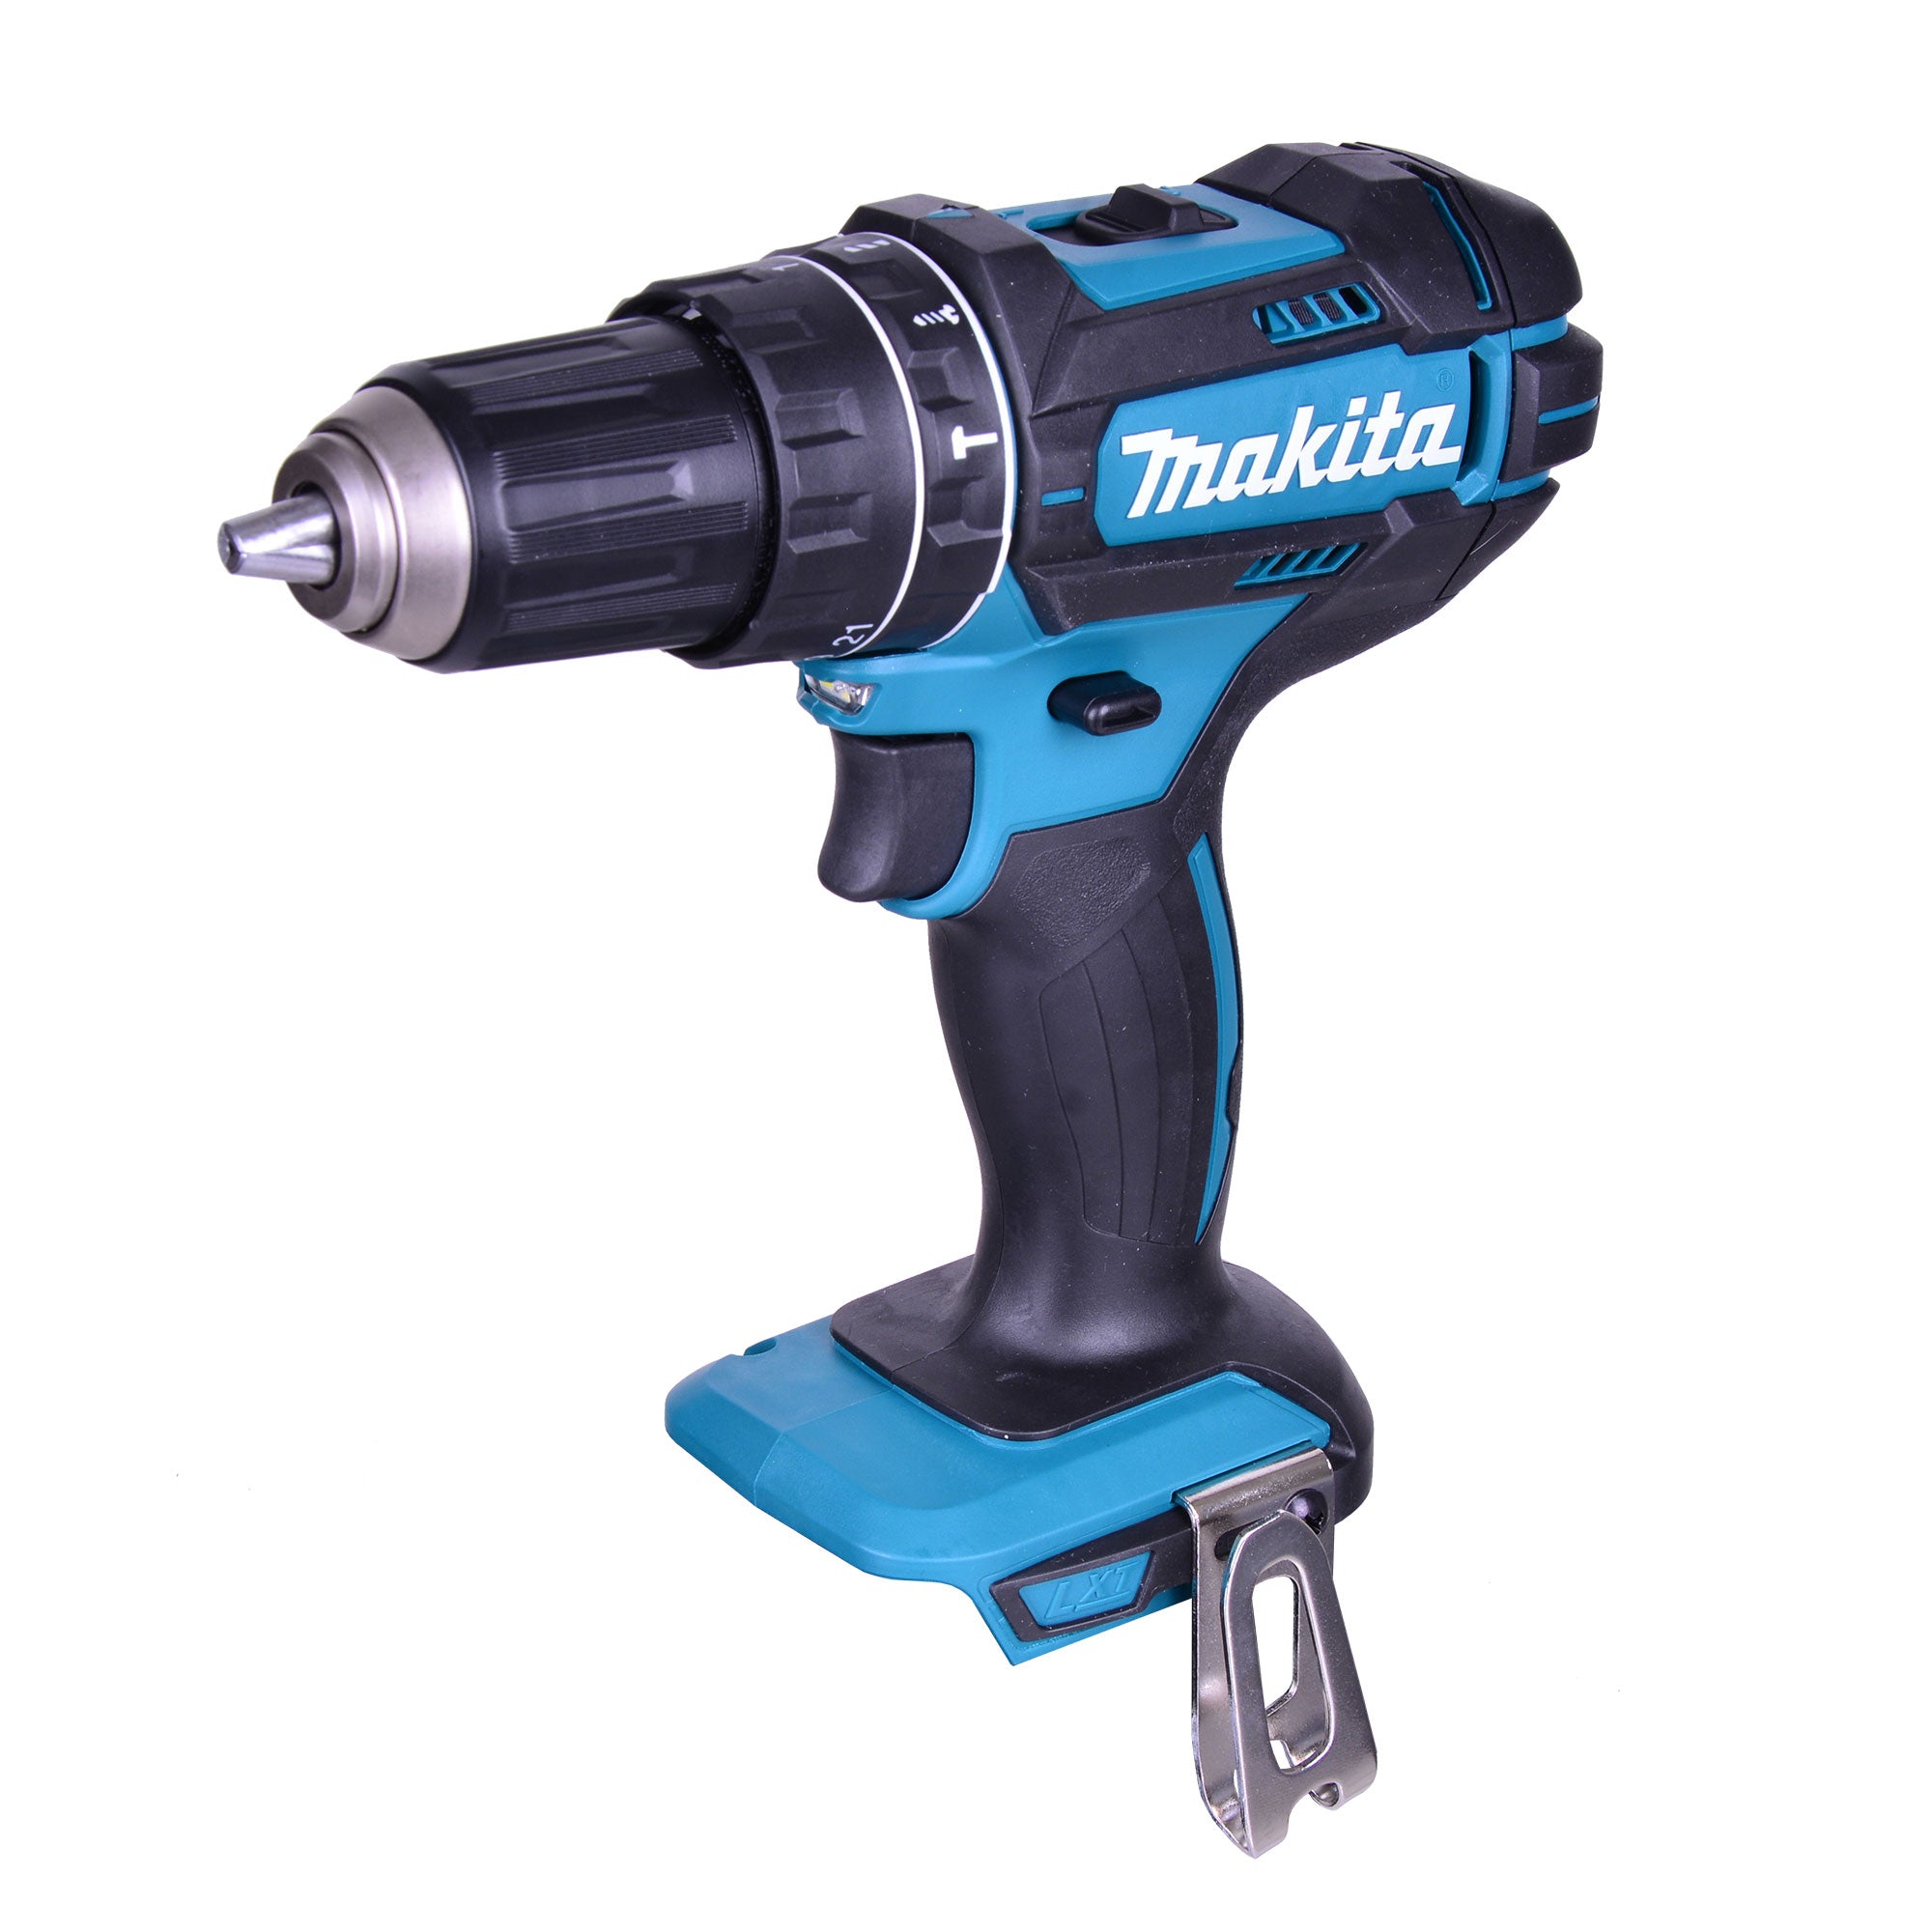 Makita DHP482Z  -  1/2" Cordless Hammer Drill / Driver - wise-line-tools